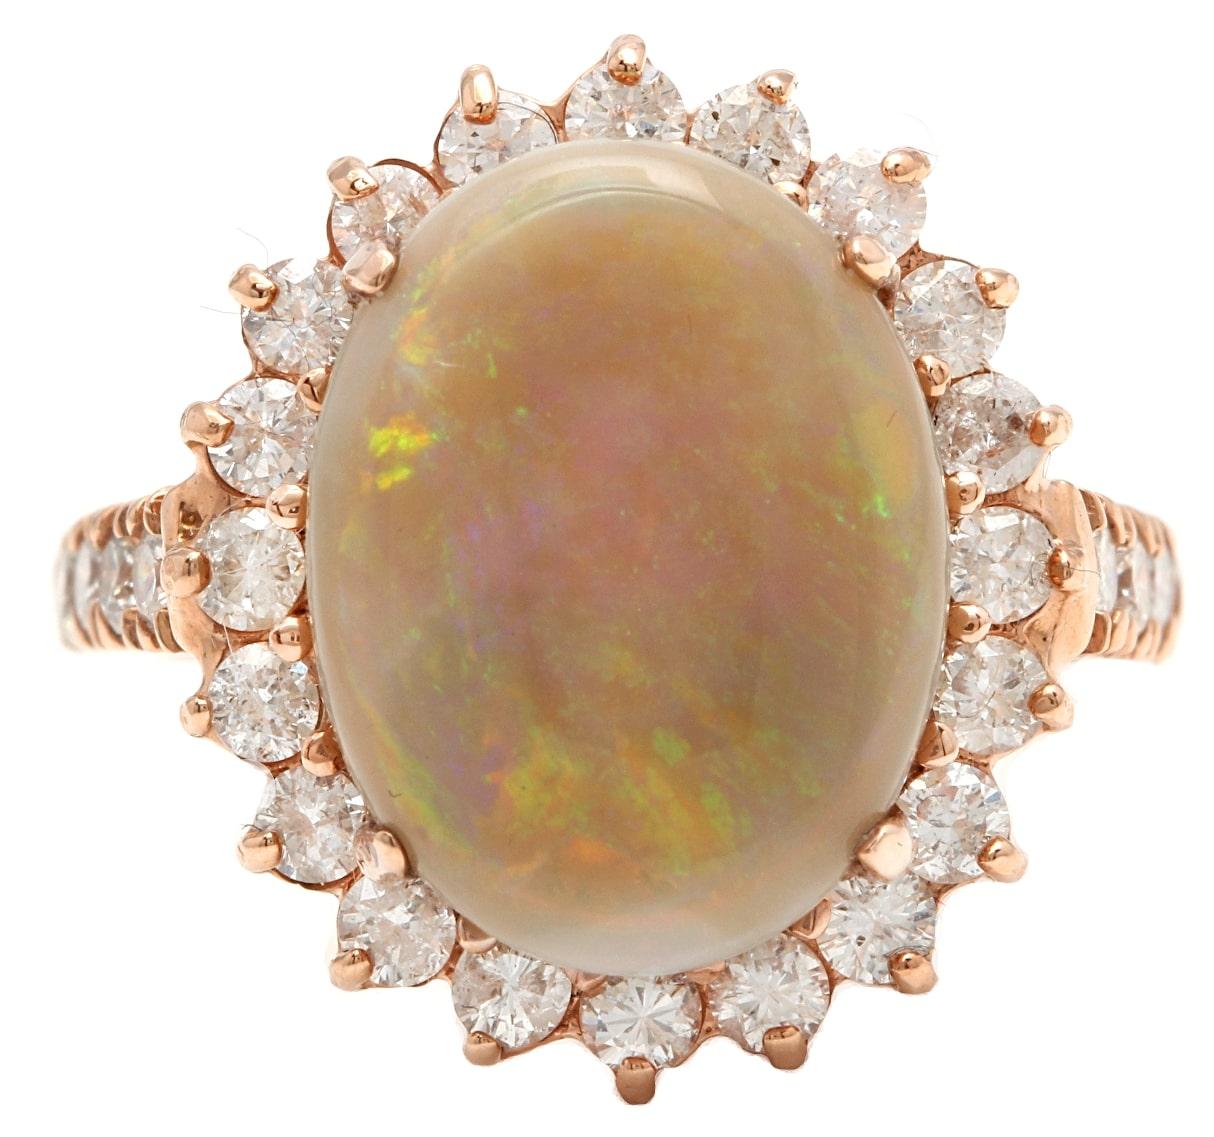 7.00 Carats Natural Impressive Australian Opal and Diamond 14K Solid Rose Gold Ring

Amazing play of colors opal. Pictures don't show the beauty of the opal.

Suggested Replacement Value: 6,800.00

Total Natural Opal Weight is: Approx. 6.00 Carats